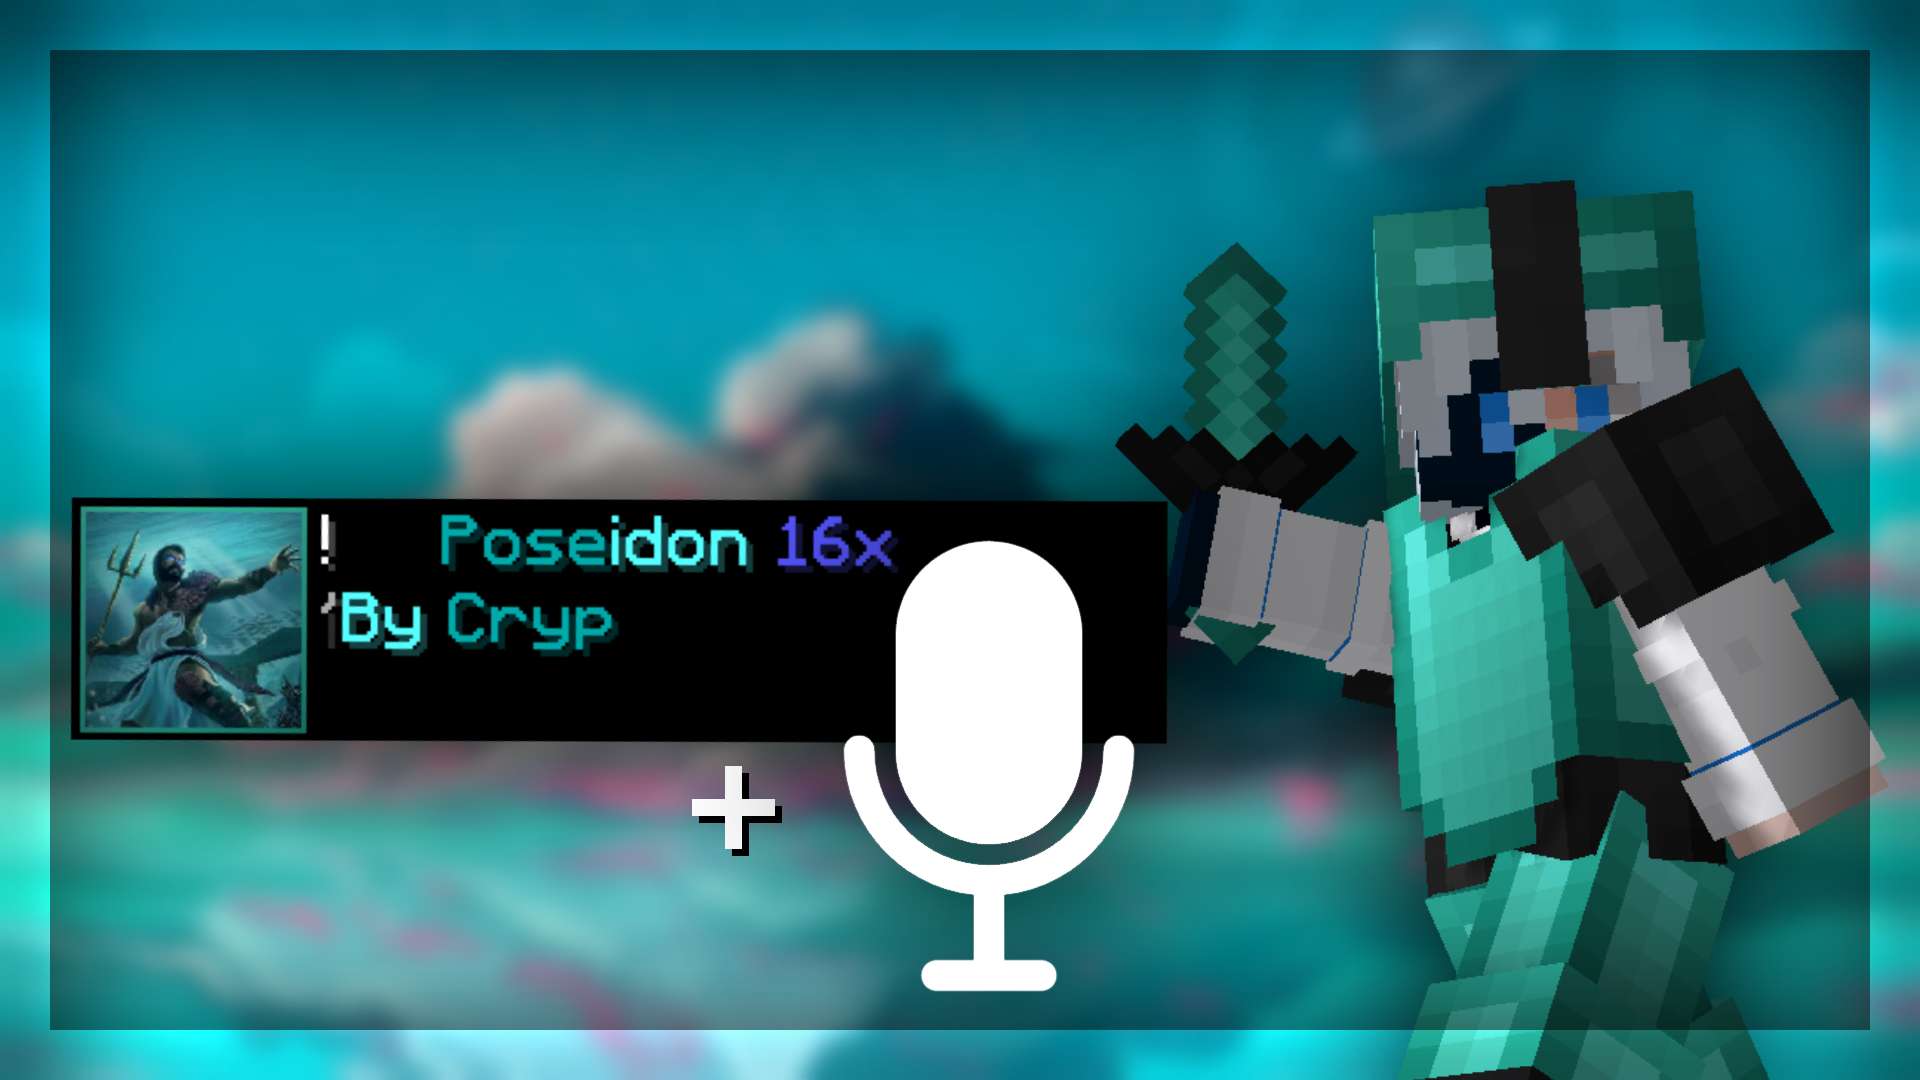 Poseidon  16x by Cryp & By Cryp on PvPRP